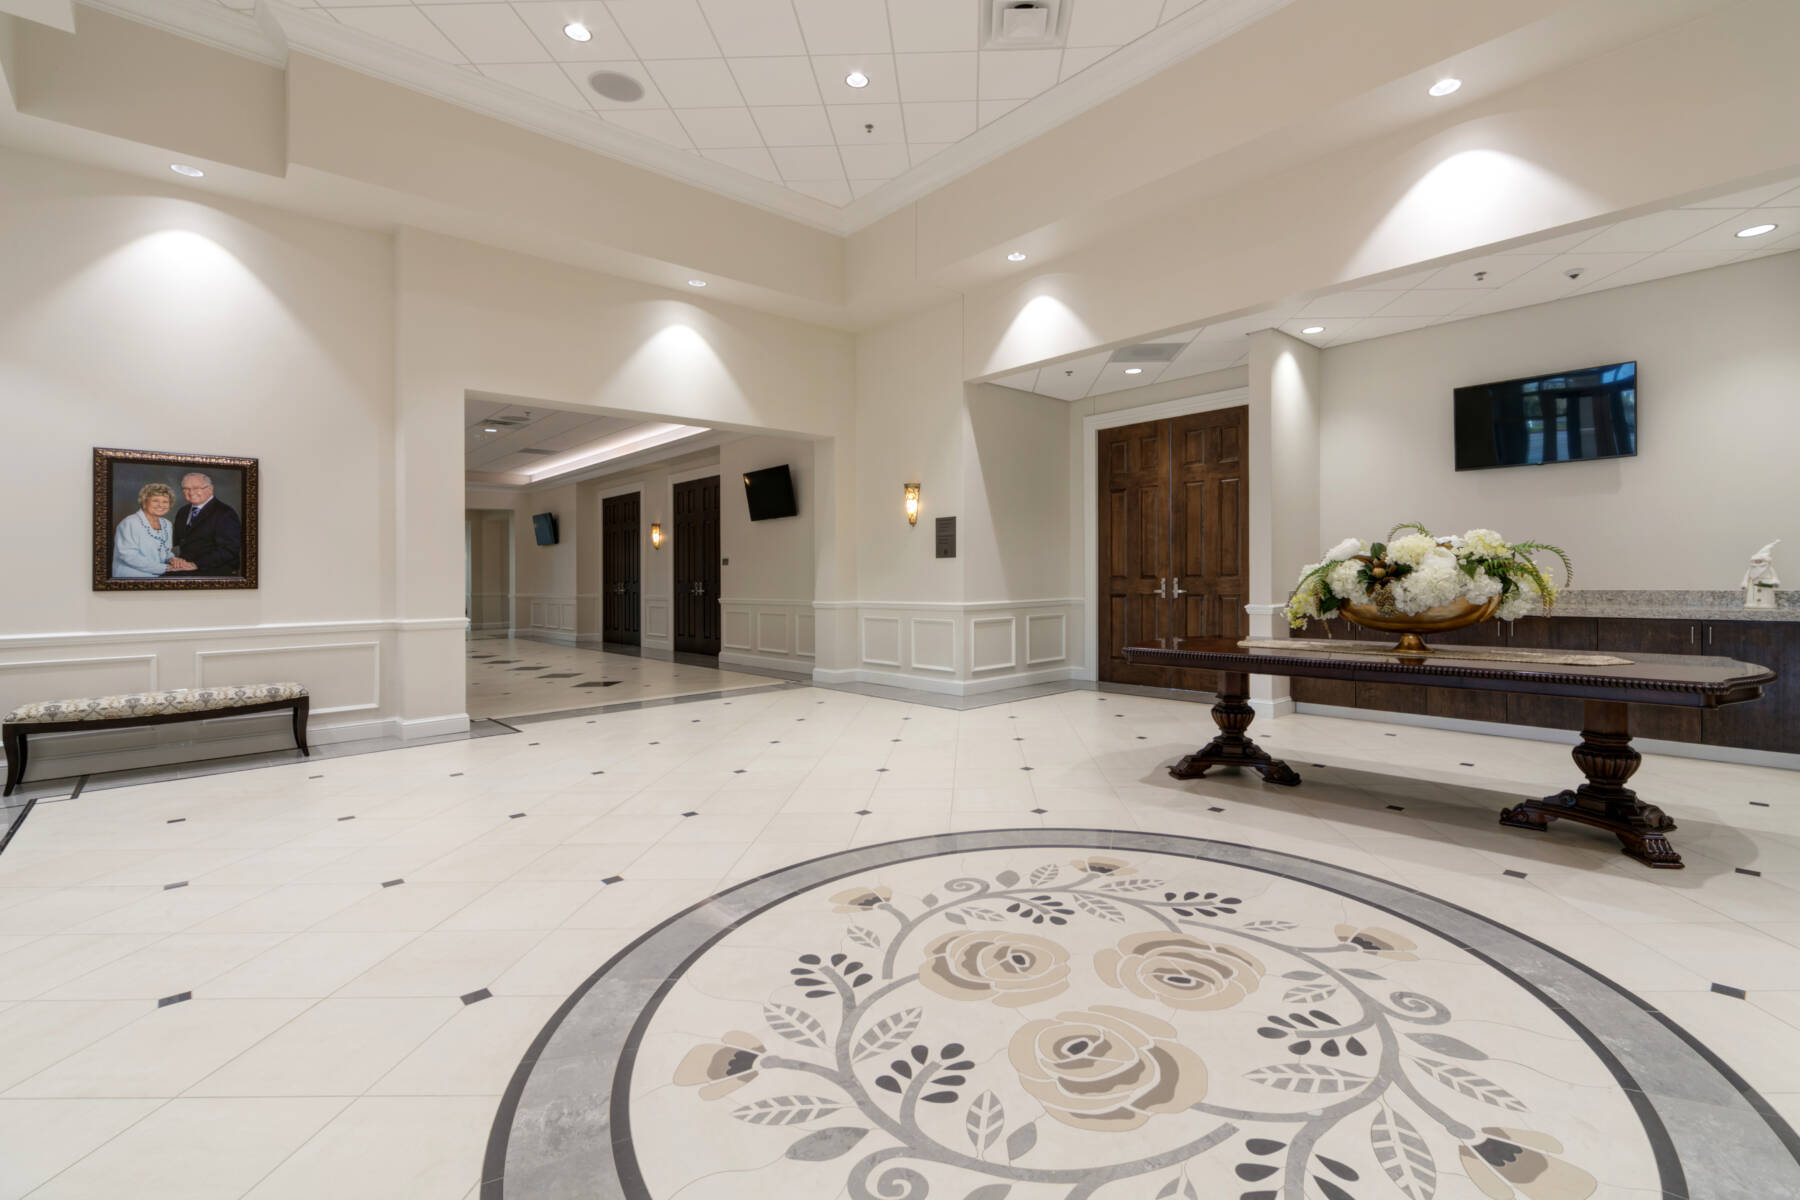 Light-colored premium ceramic tile in an events center common area. The centerpiece is a tile medallion of cream roses and leaves.